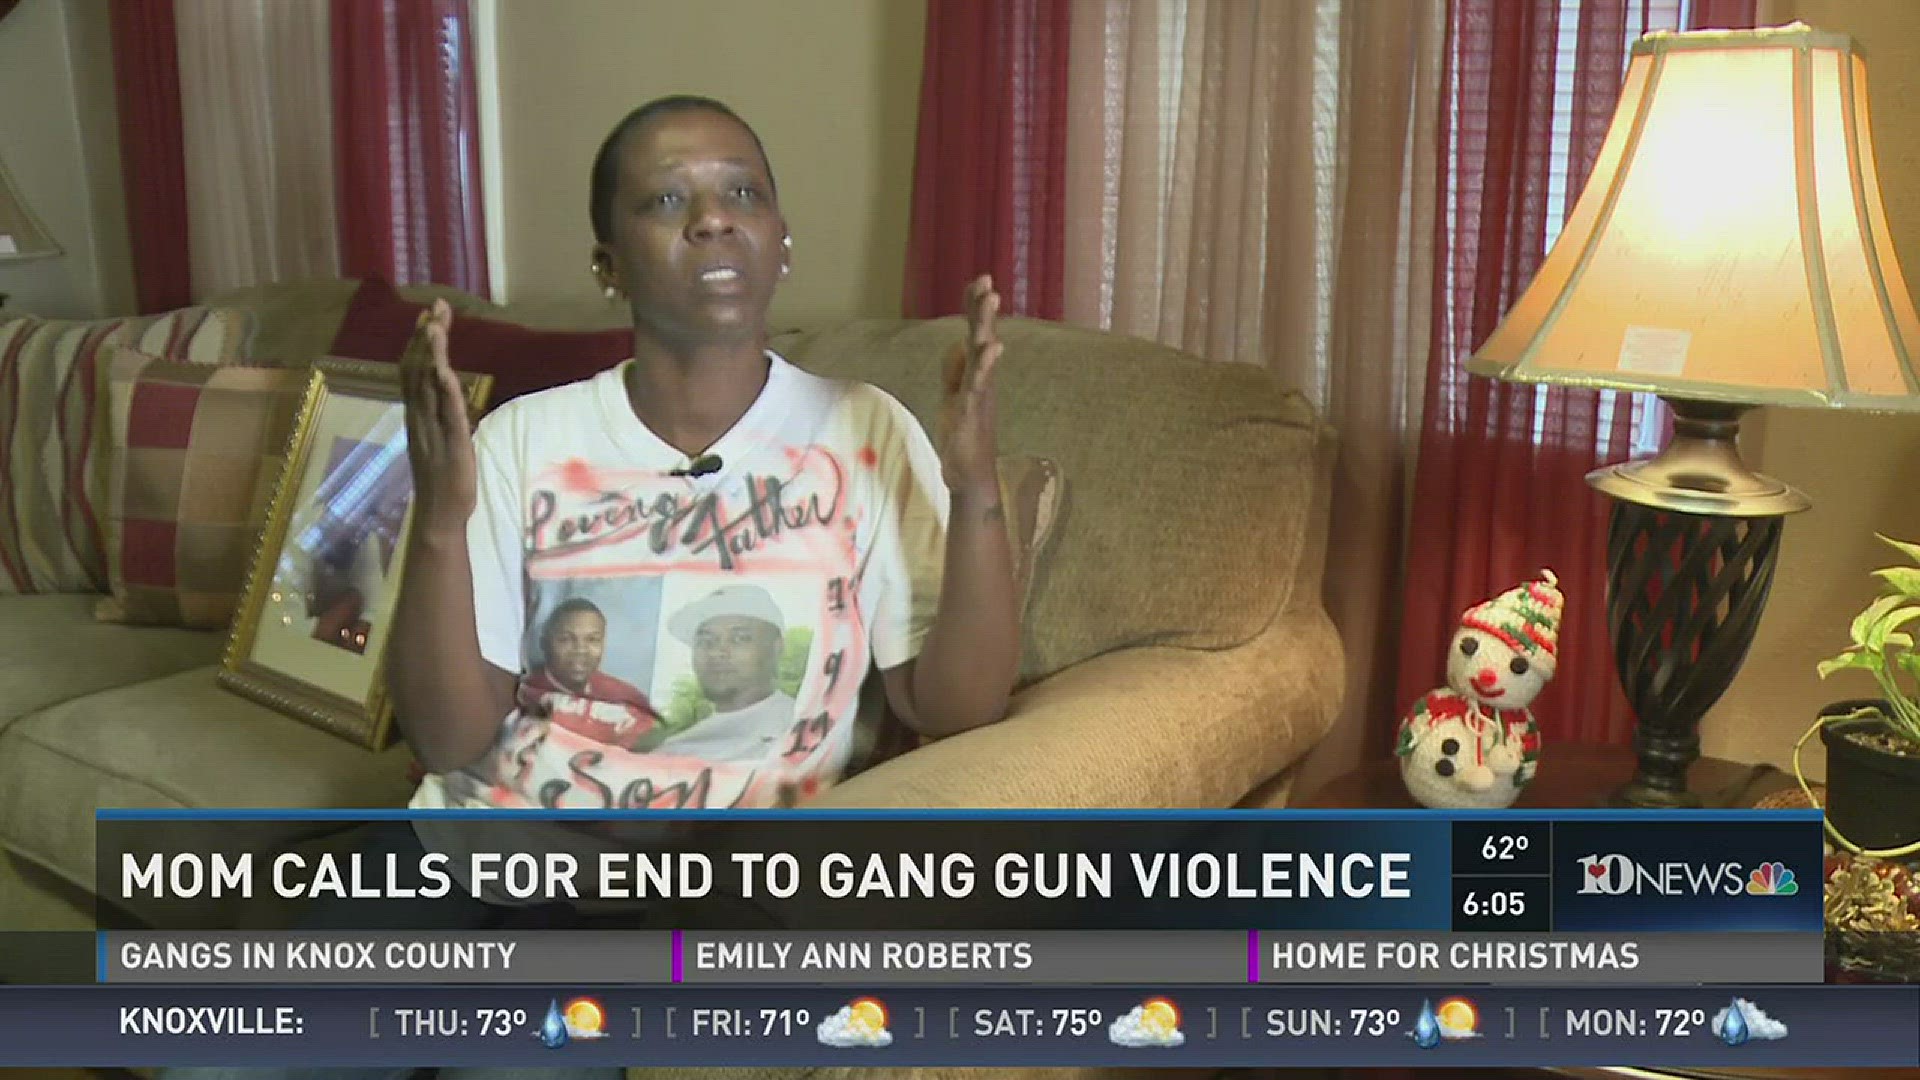 A Knoxville mom whose son was killed previously in gun violence is calling for an end to gang gun shootings.